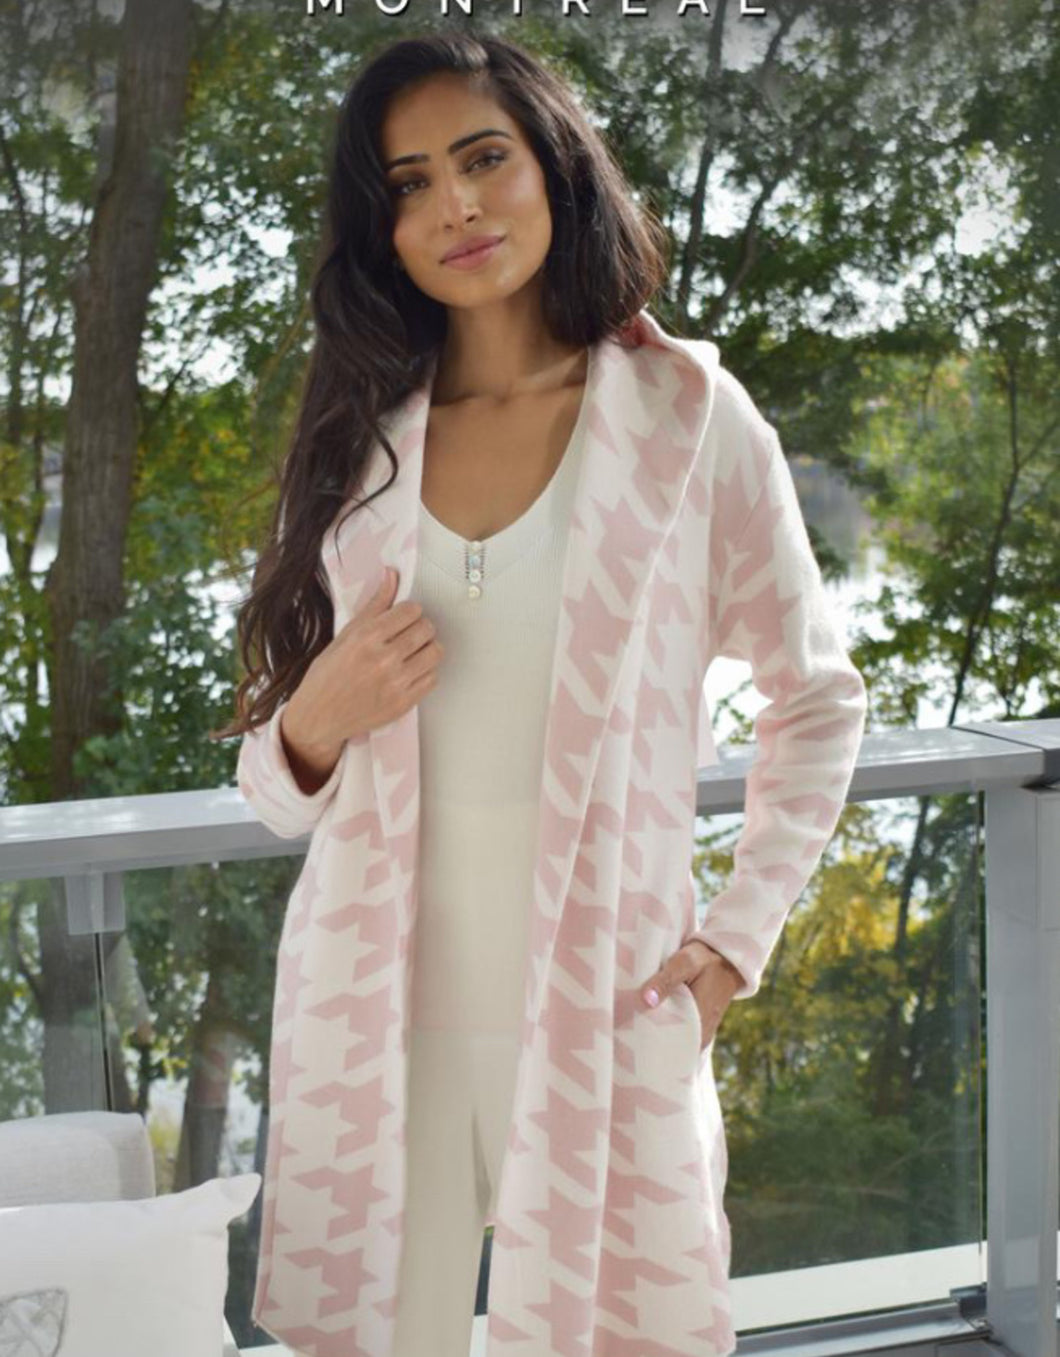 Simply stunning describes this pink and white hooded open cardigan. A perfect style to transition between seasons, you will feel and look like a fashionista when you put on this uniquely fabulous cardigan with an abstract pattern.  Pairs beautifully with blue or white denim.